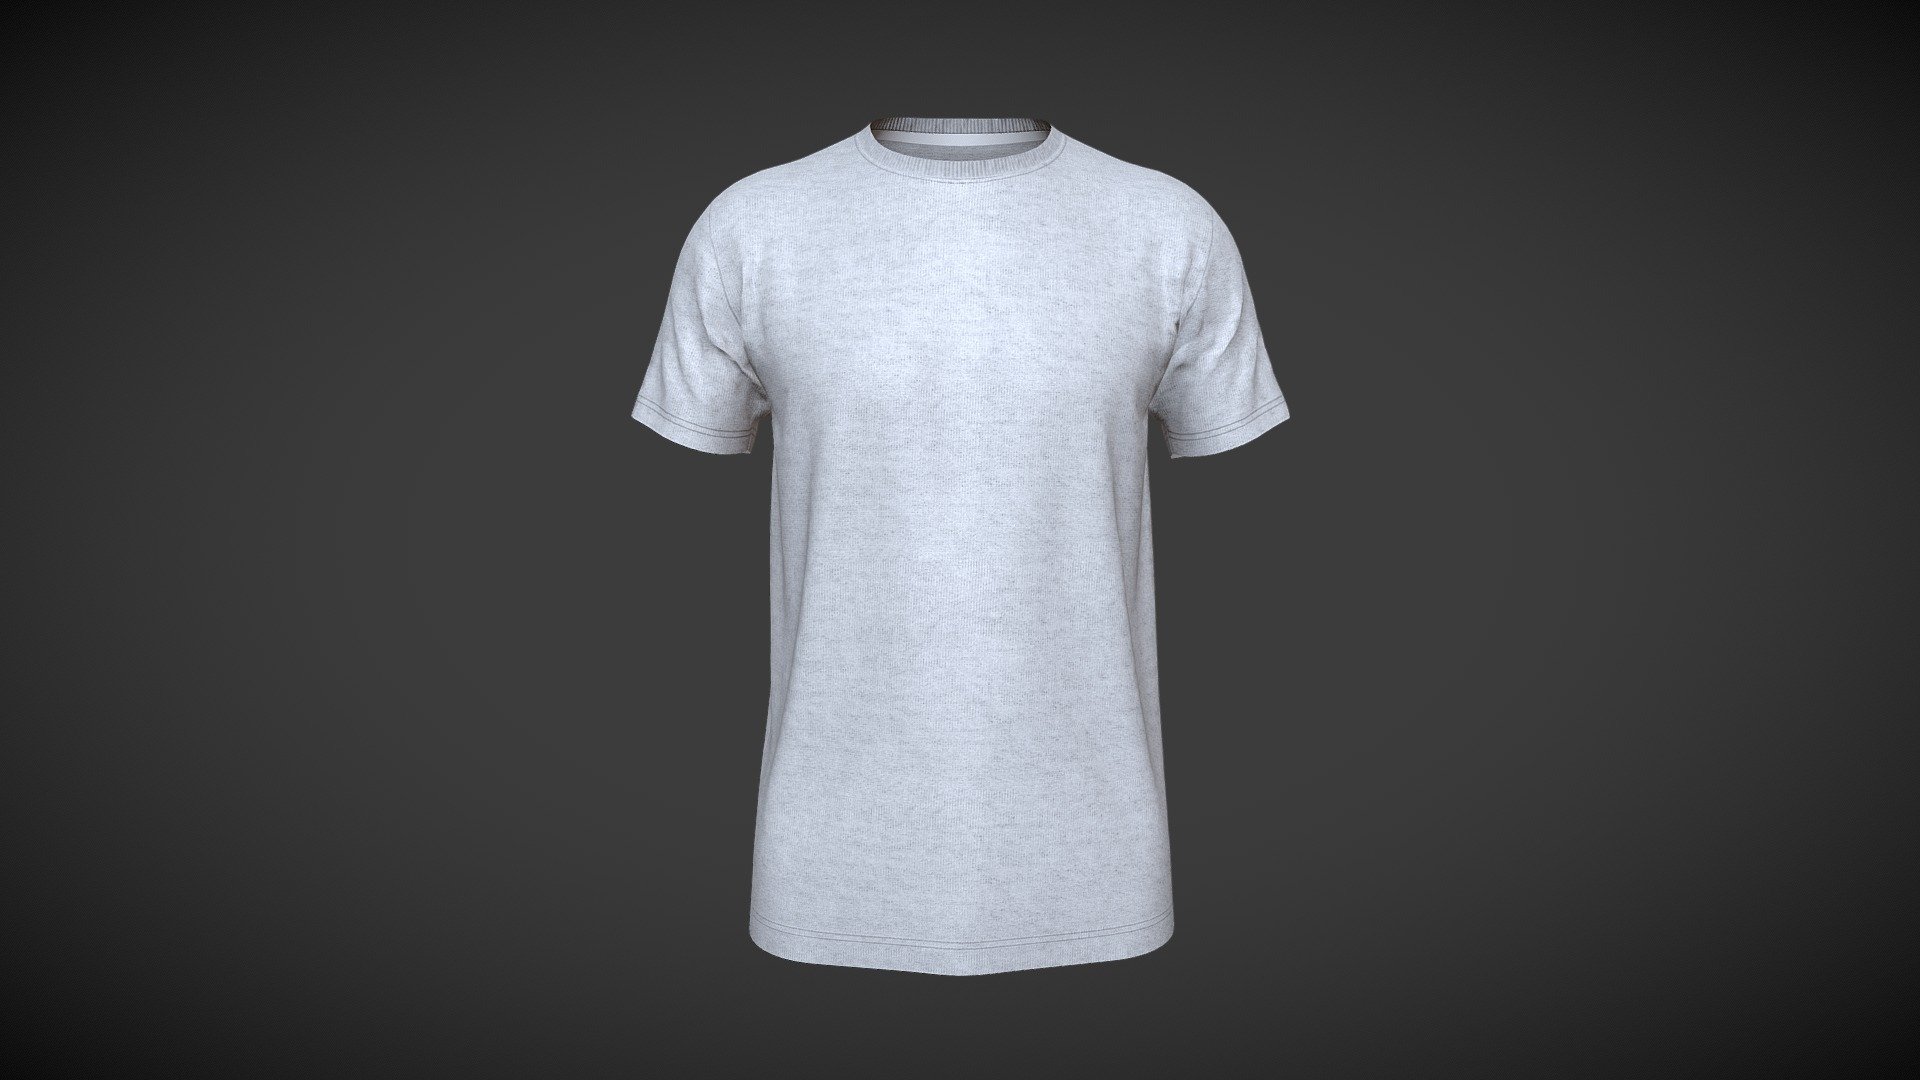 Basic Regular T-shirt

I am a Professional 3D Fashion/Apprel Designer. I have 7 years working experience about 3D Fashion. I am working with Clo3d, Marvelous Designer (MD), Daz3d, Blender, Cinema4d, Etc.

Features:
1.  2k UV Texture
2.  Triangle mesh
3.  Textures with Non-overlapping UV Map (2048x2048 Pixels)
4.  In additonal Textures folder have diffuse,displacement,metalness,normal,opacity,roughness maps.

Attachment Fils:
Exported Files (All are exported in DAZ Studio scale)
* OBJ
* FBX
* Marvelous Designer/Clo3d file (zprj) - Basic Regular T-shirt - Buy Royalty Free 3D model by clothingcart 3d model